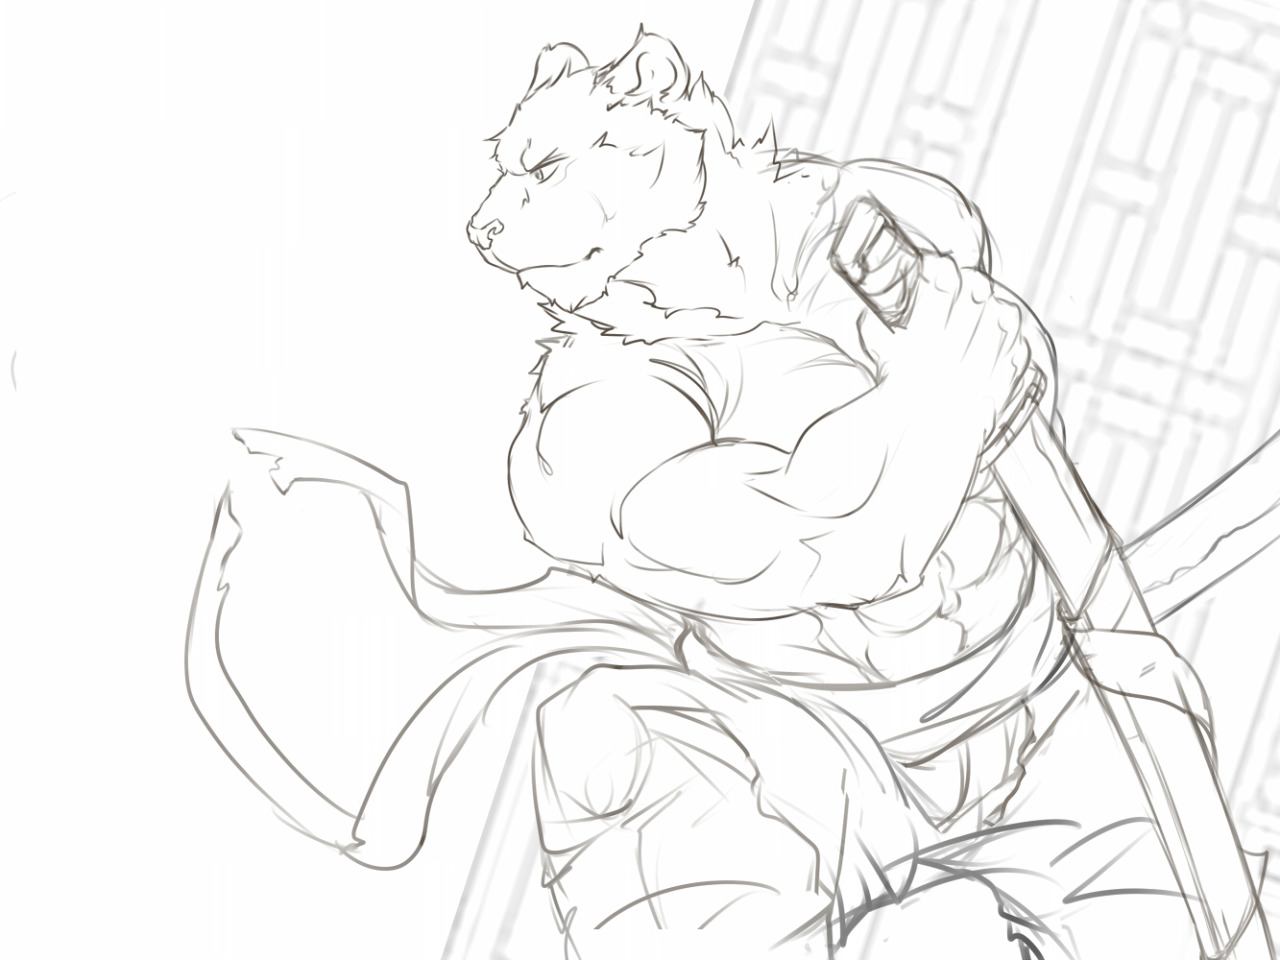 ralphthefeline:    Some feline swordsman dude. Might color it later when I feel more